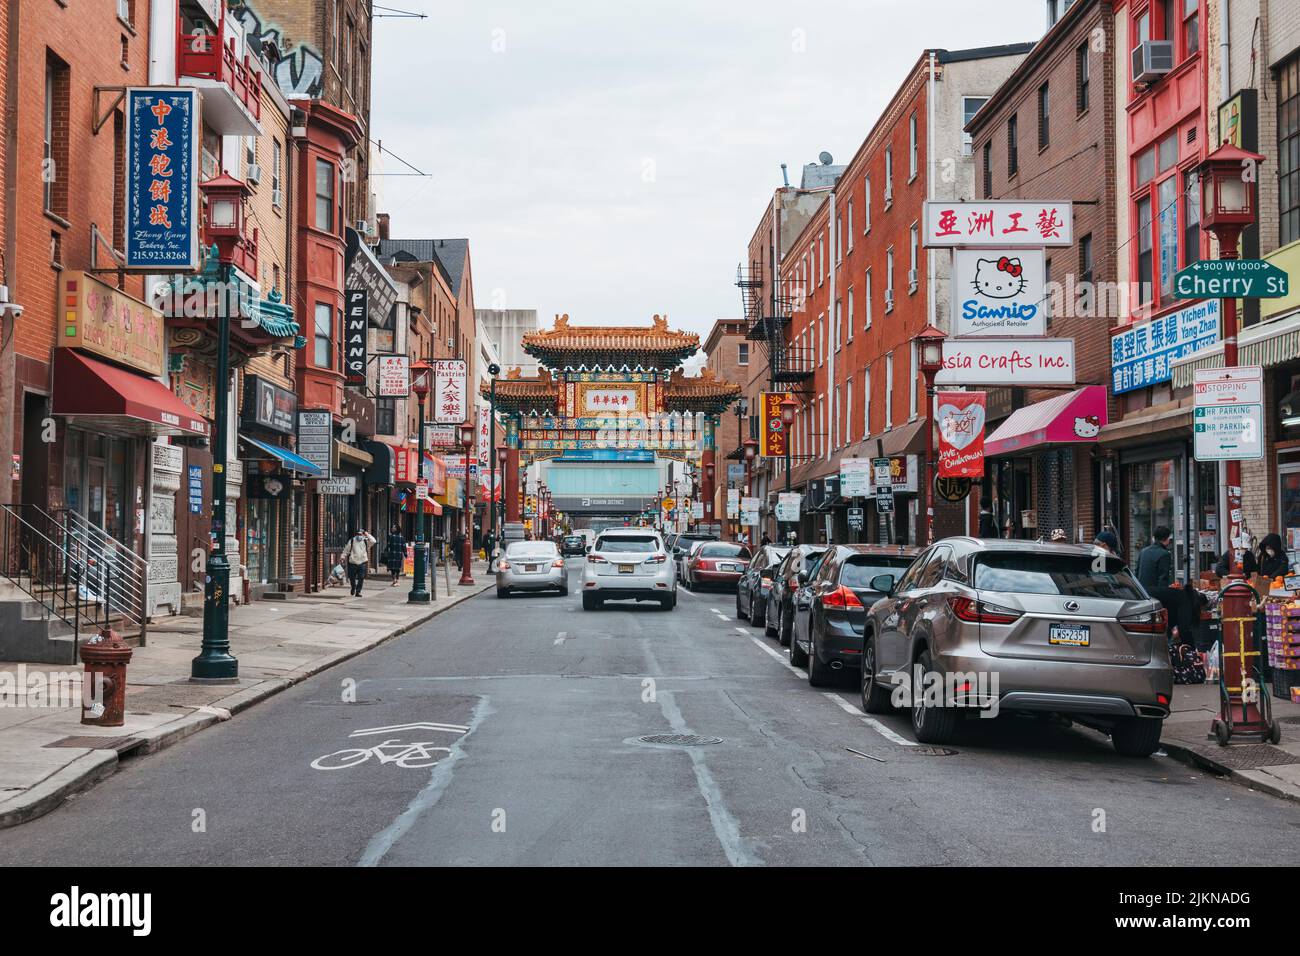 Looking down a street filled with restaurants, shops and other Chinese businesses in Chinatown, Philadelphia, USA Stock Photo